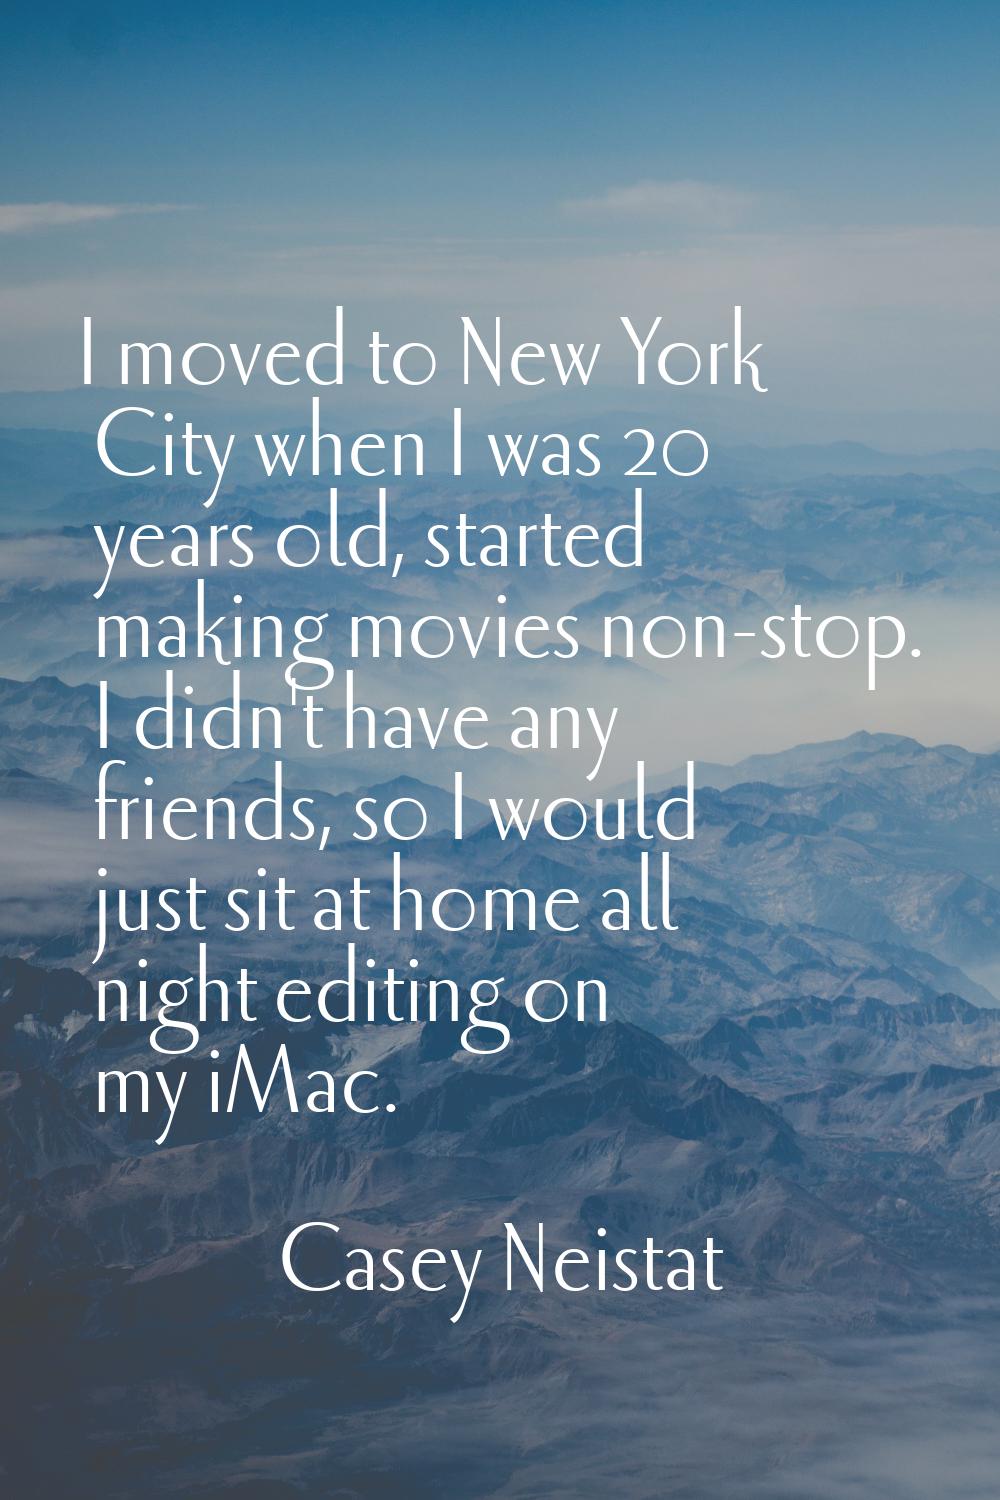 I moved to New York City when I was 20 years old, started making movies non-stop. I didn't have any